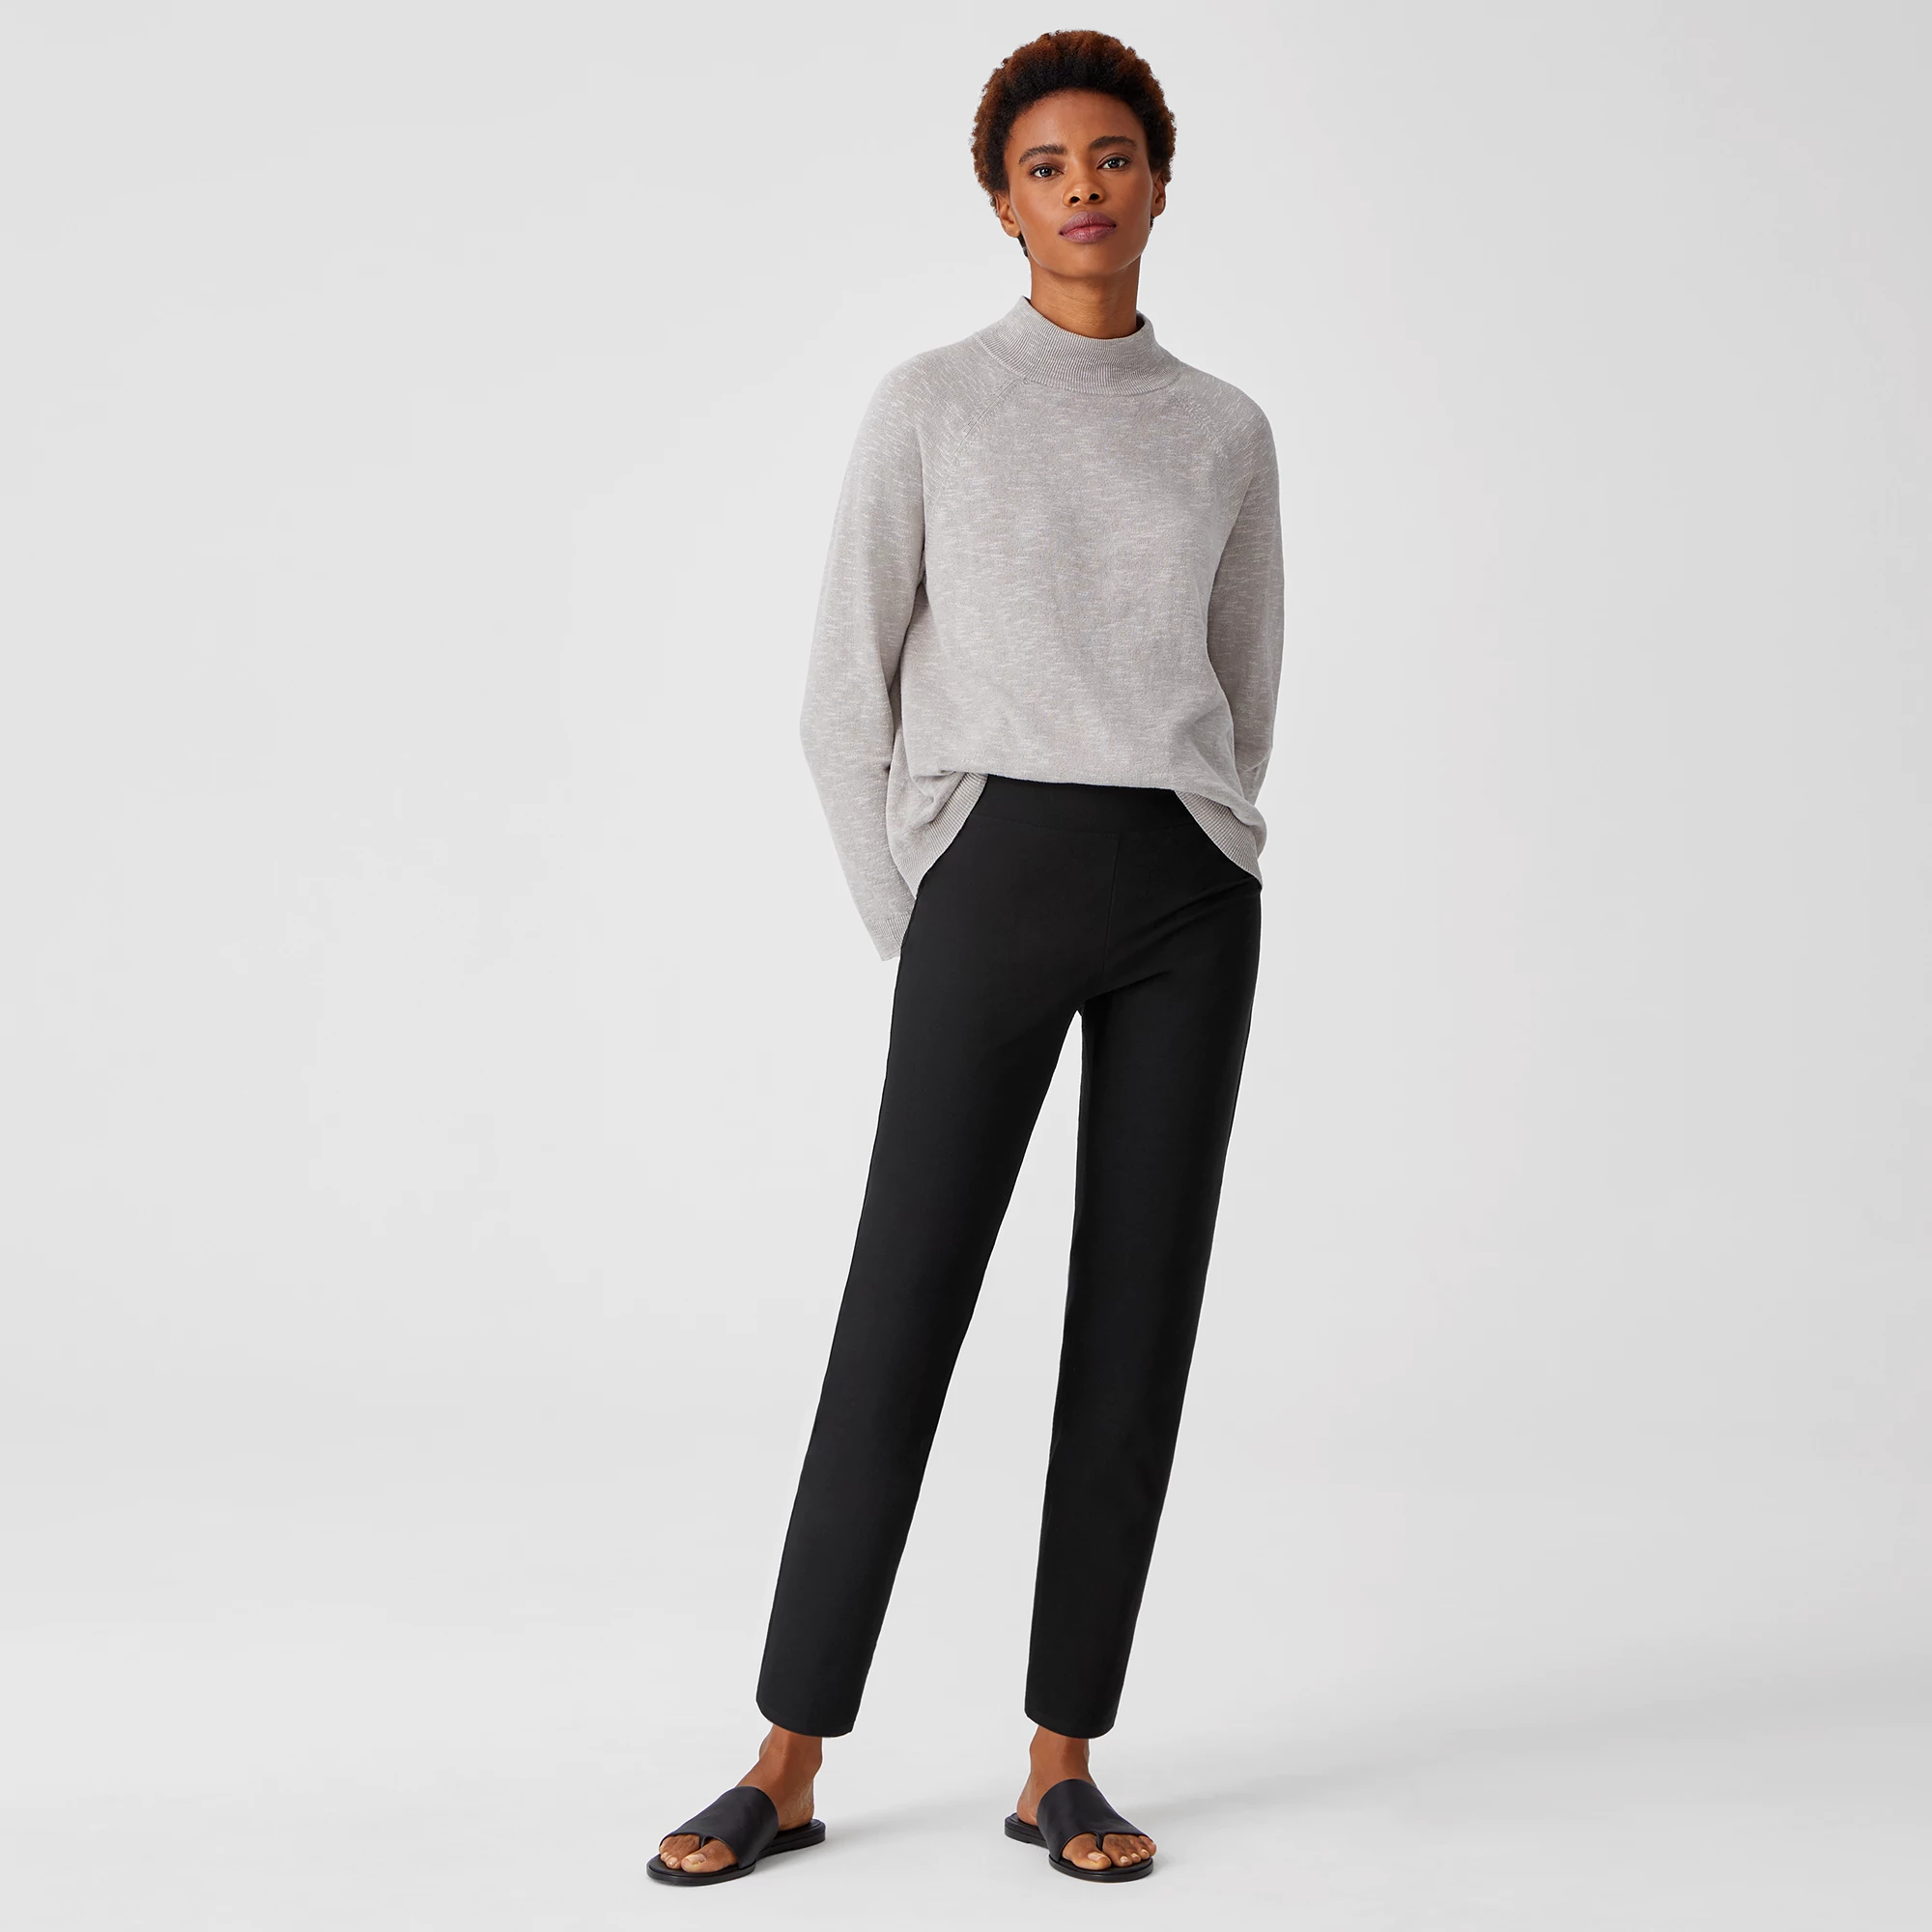 Eileen Fisher Petite High-Waist Stretch Crepe Slim Ankle Pants